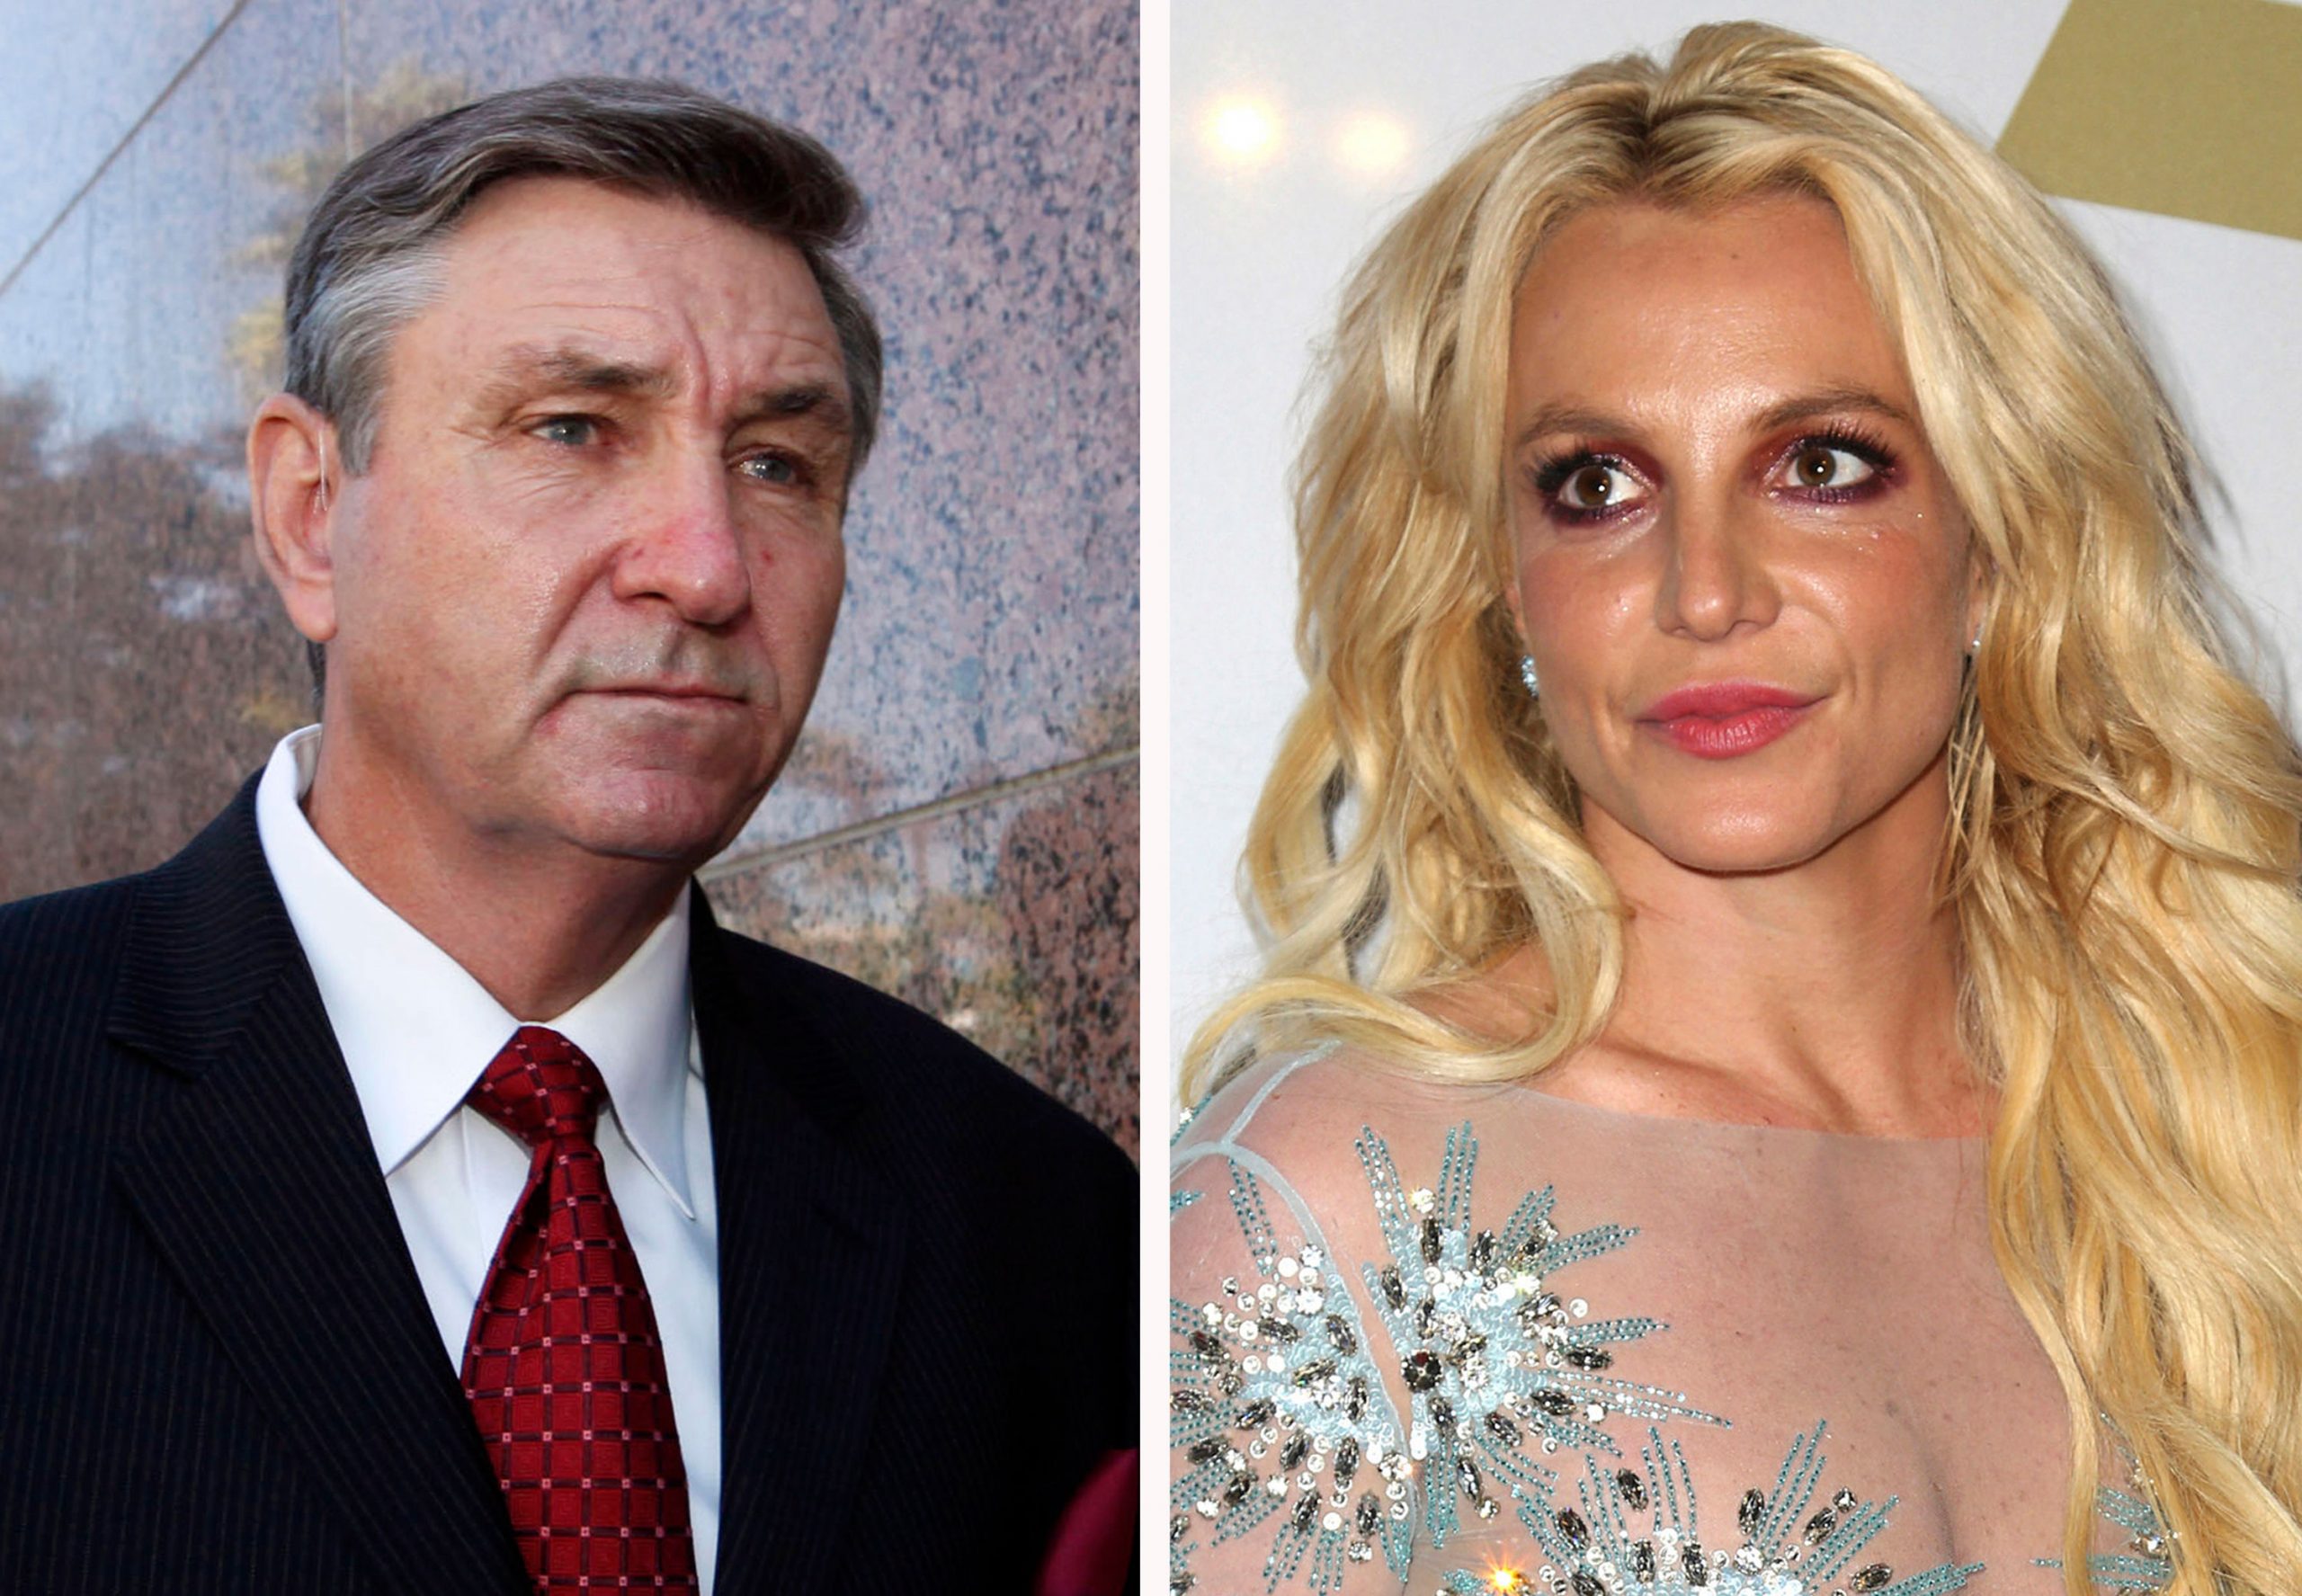 Britney Spears claims her father wants $2 million before stepping down as conservator